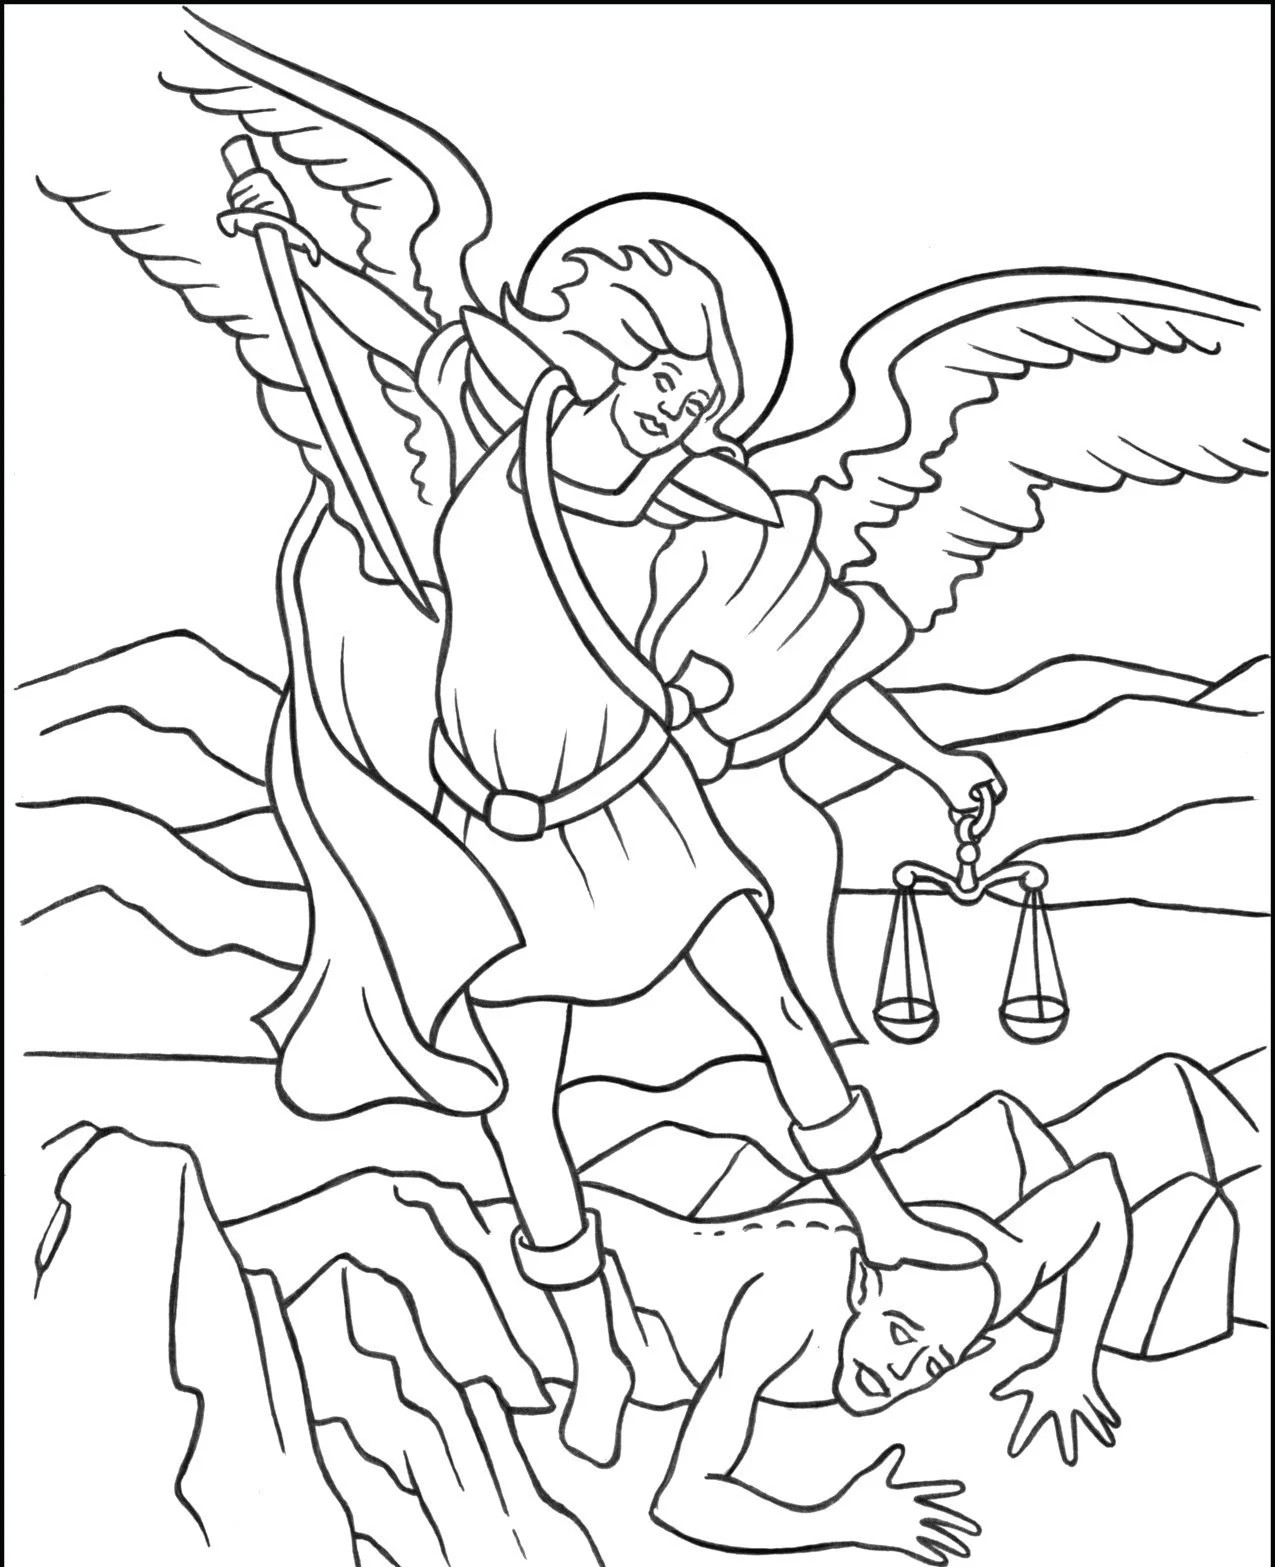 Angel Angry Coloring Page